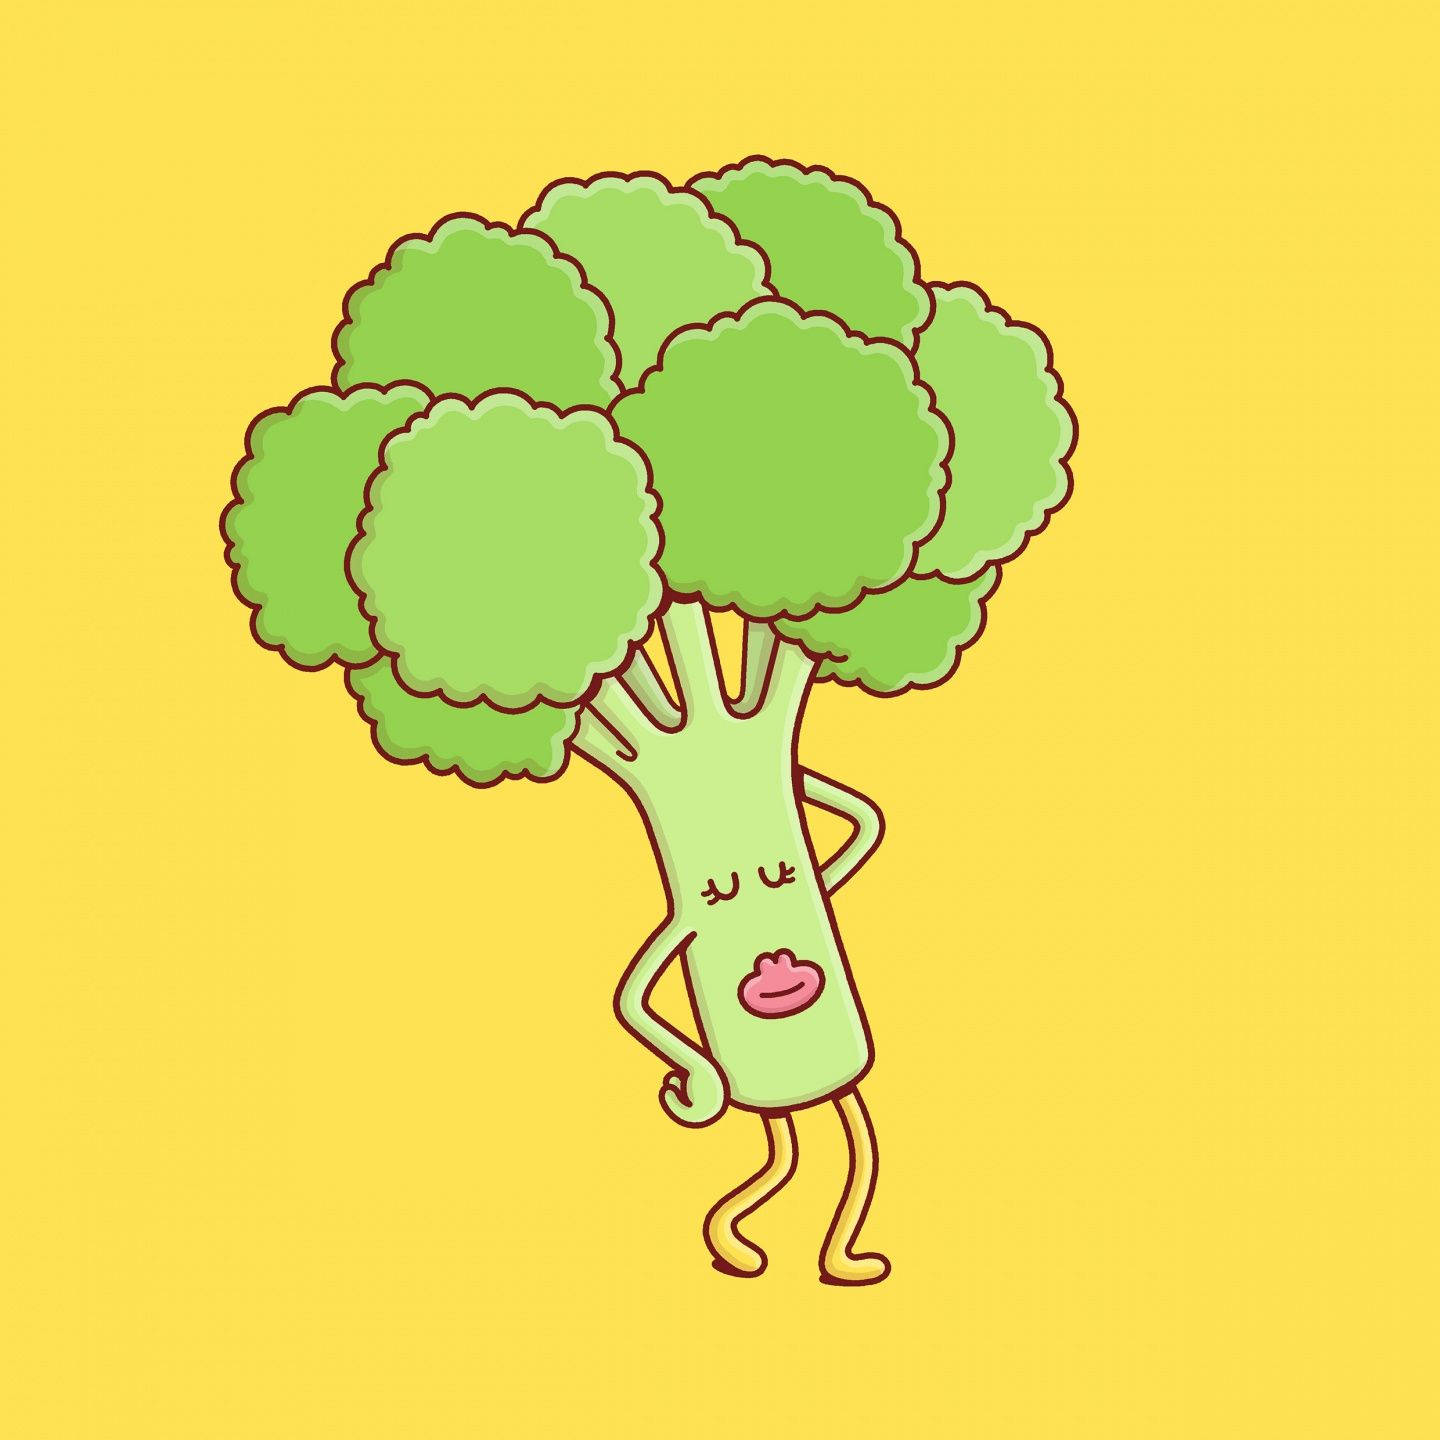 Broccoli With Annoying Face Wallpaper